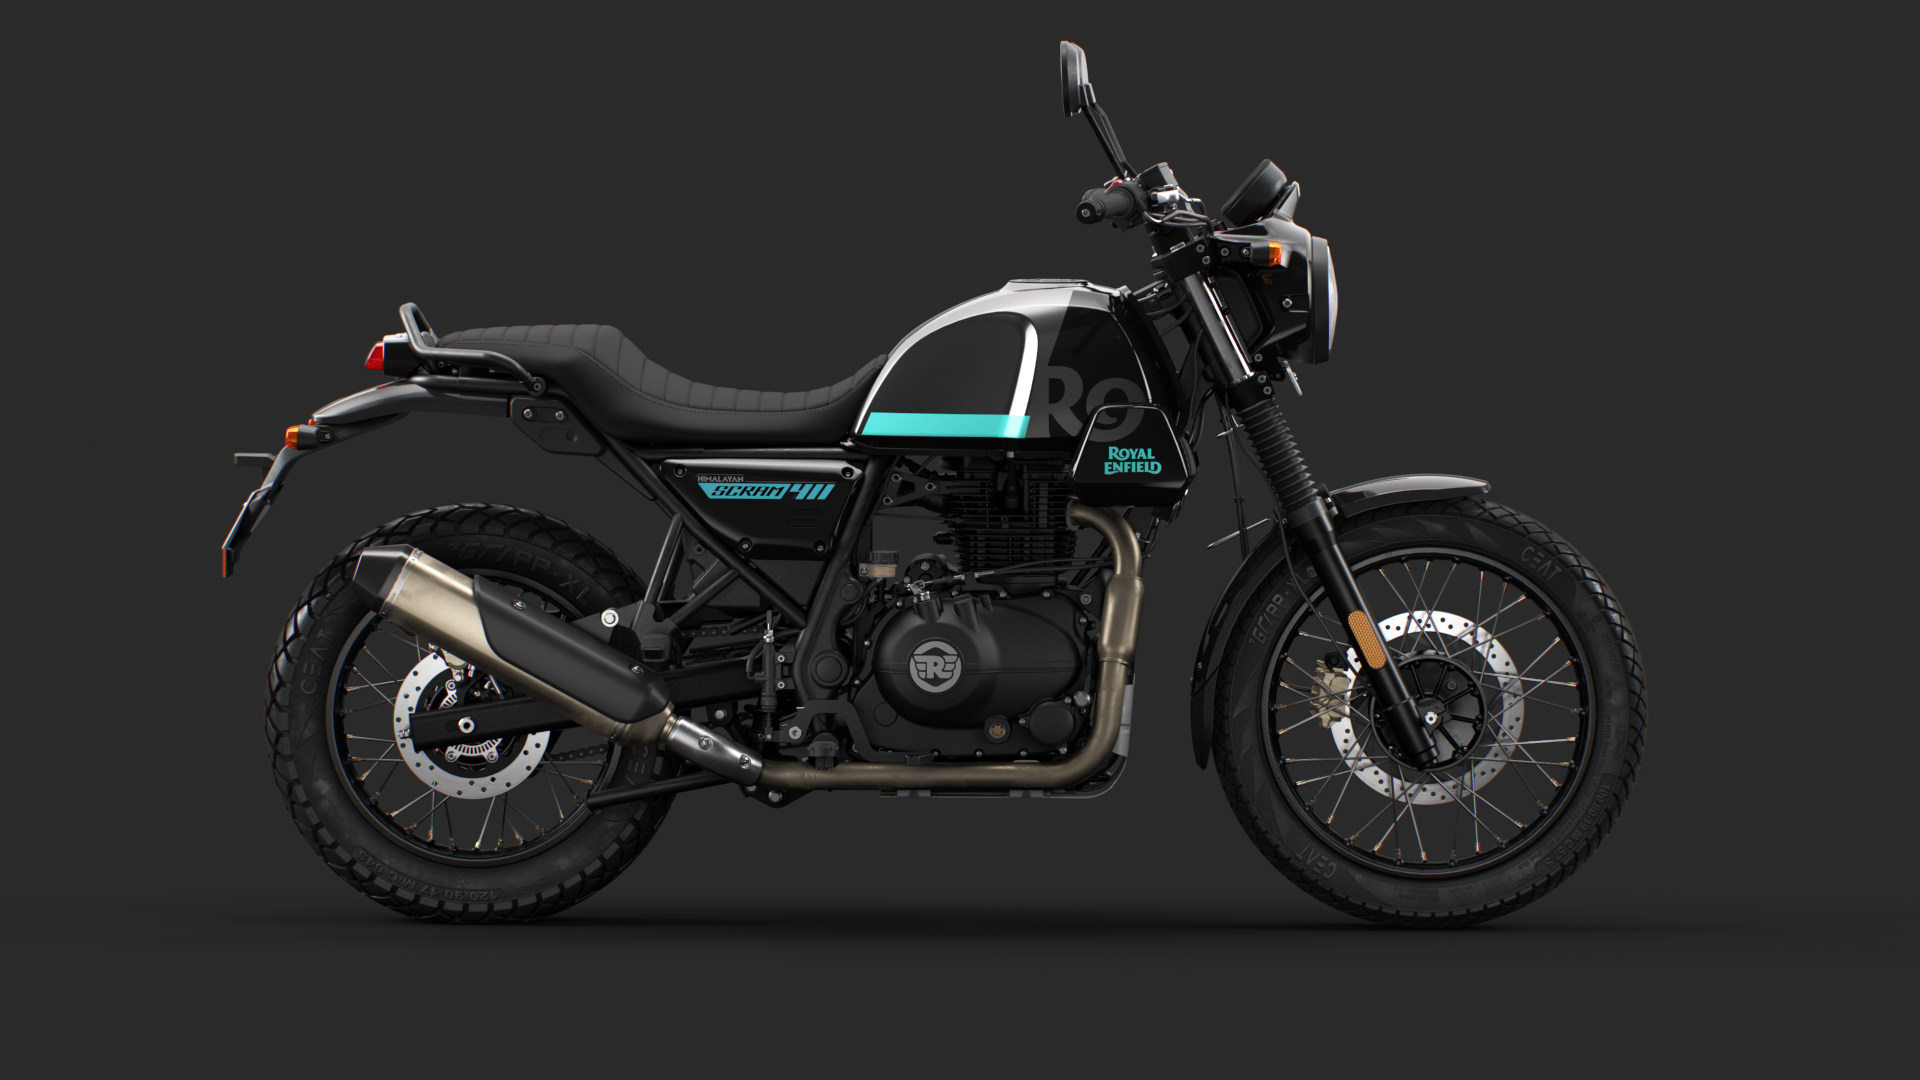 Royal Enfield Scram 411 Launched In India At Rs. 2.03 Lakhs (Ex Showroom)